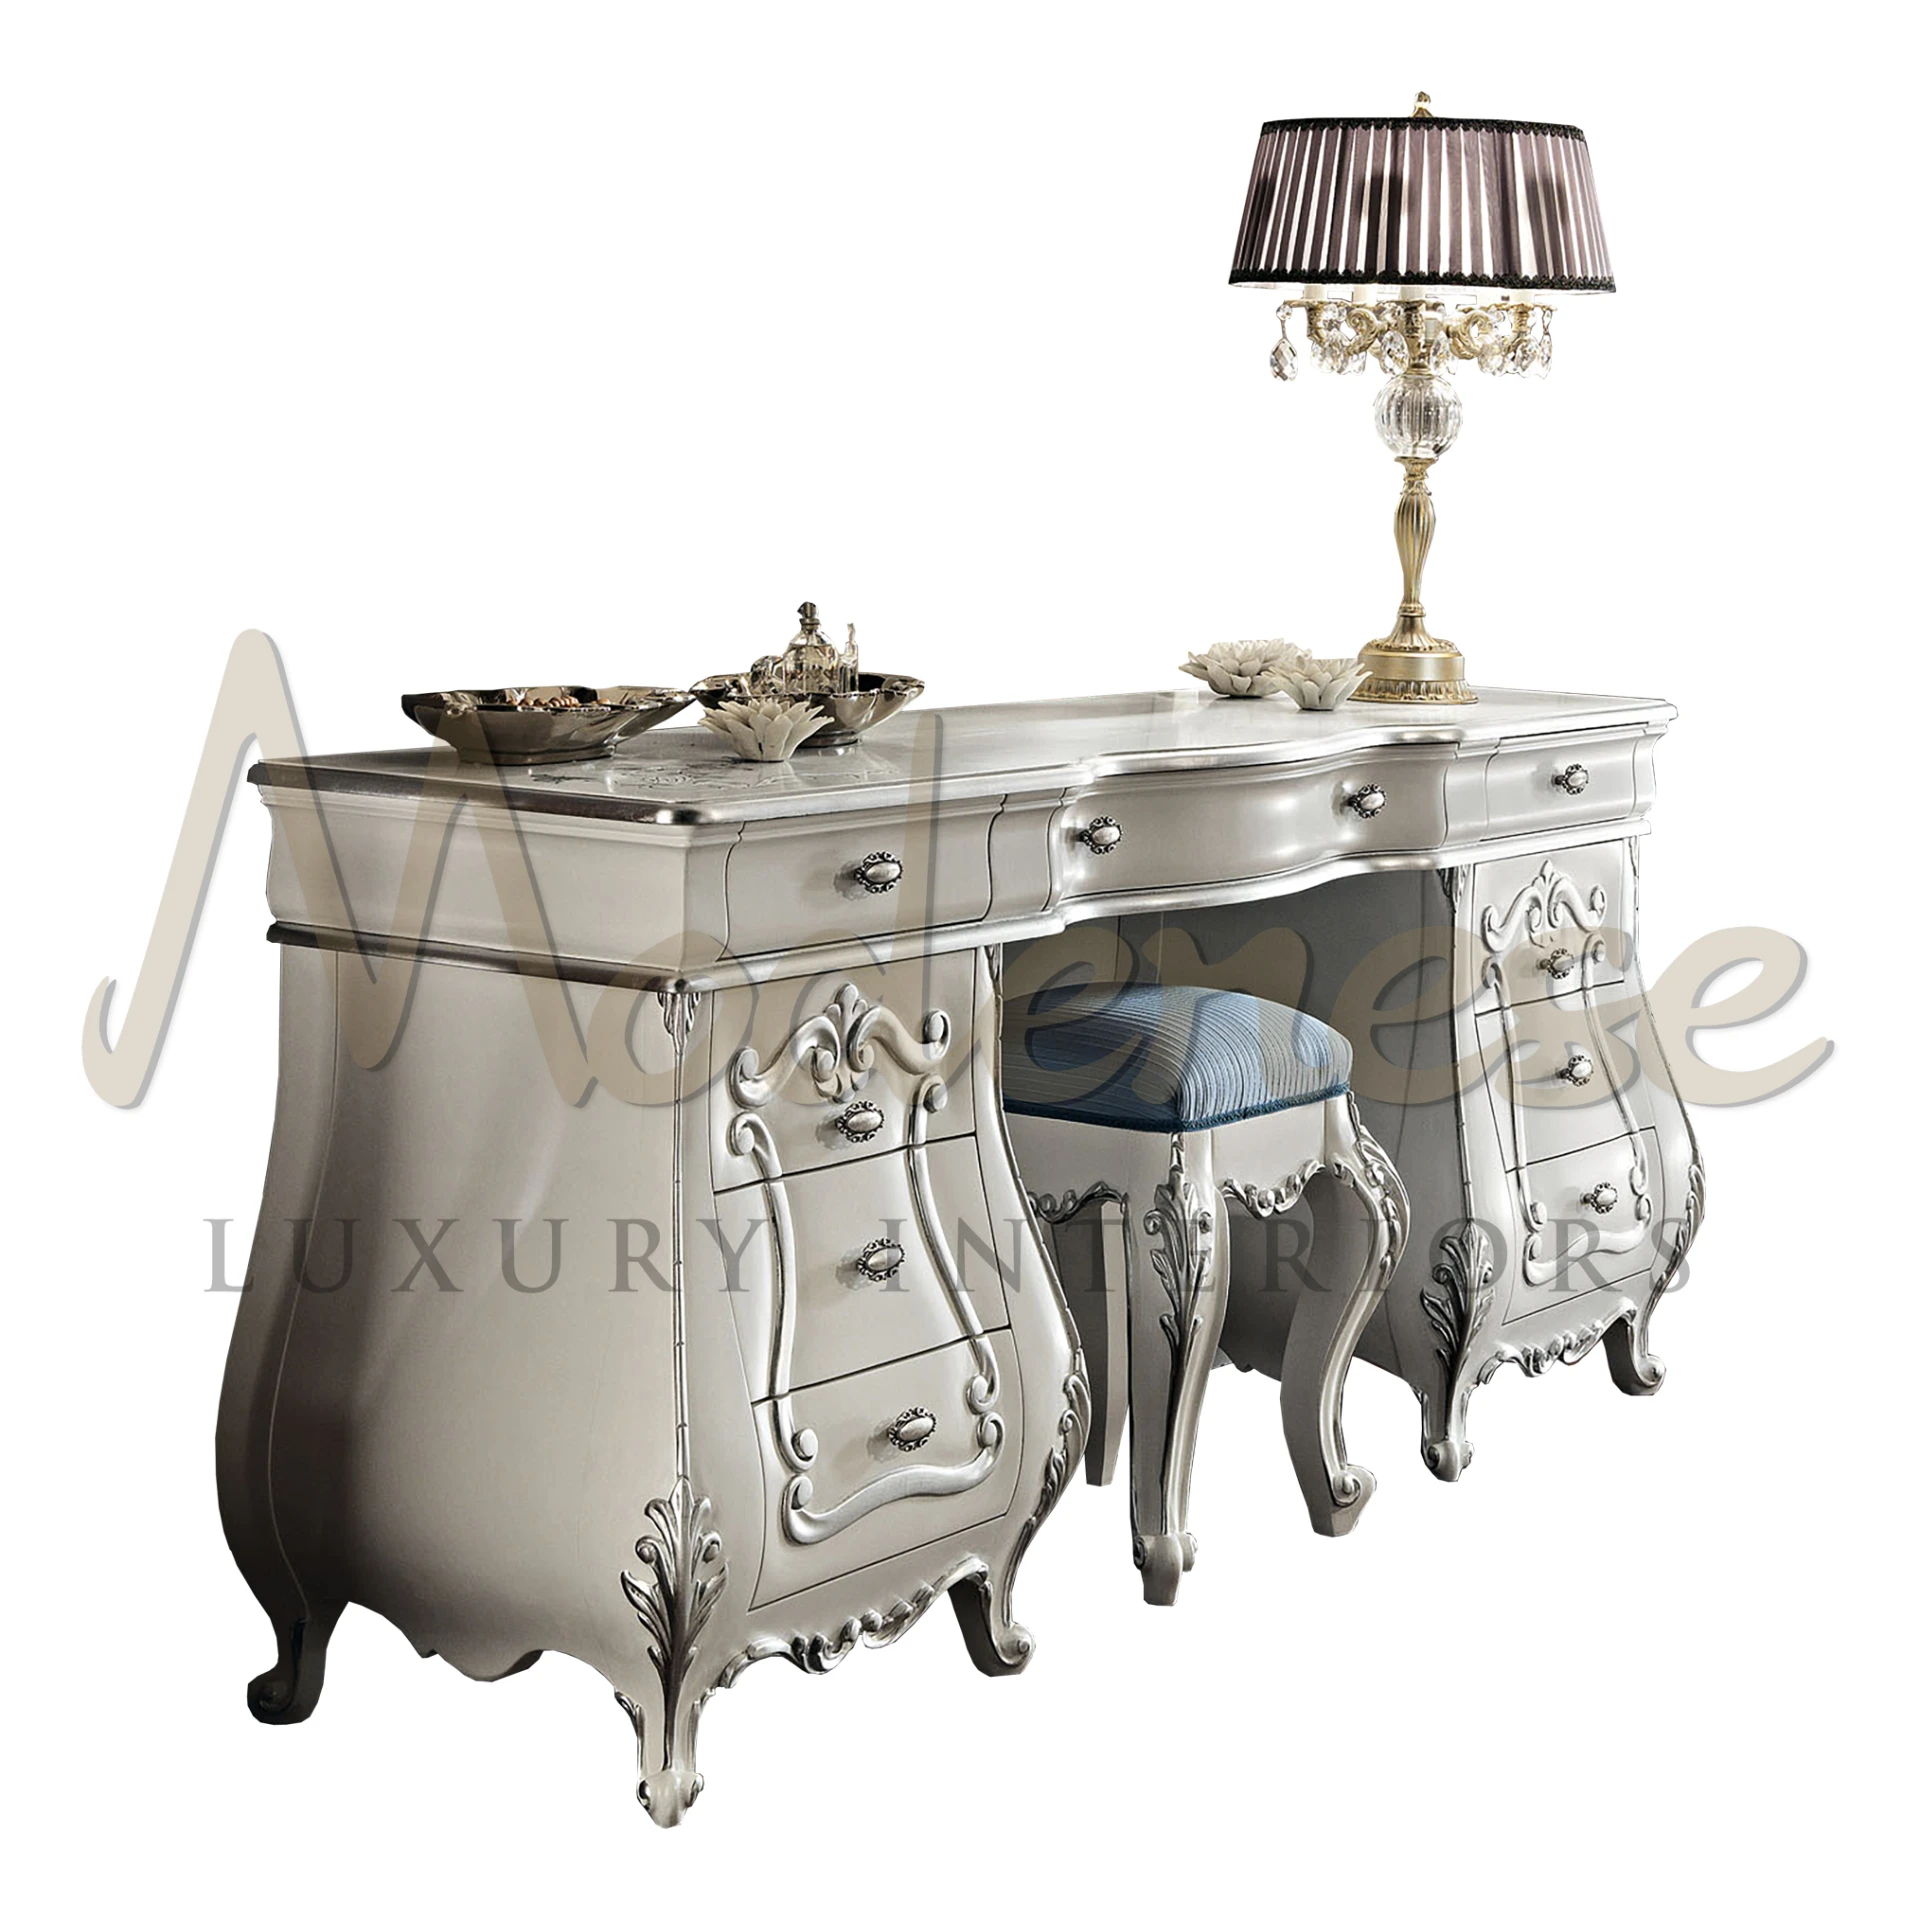 Silver-finished dressing table with baroque details and sculpted legs, accompanied by a blue upholstered stool and an elegant fringed lamp by Modenese Furniture